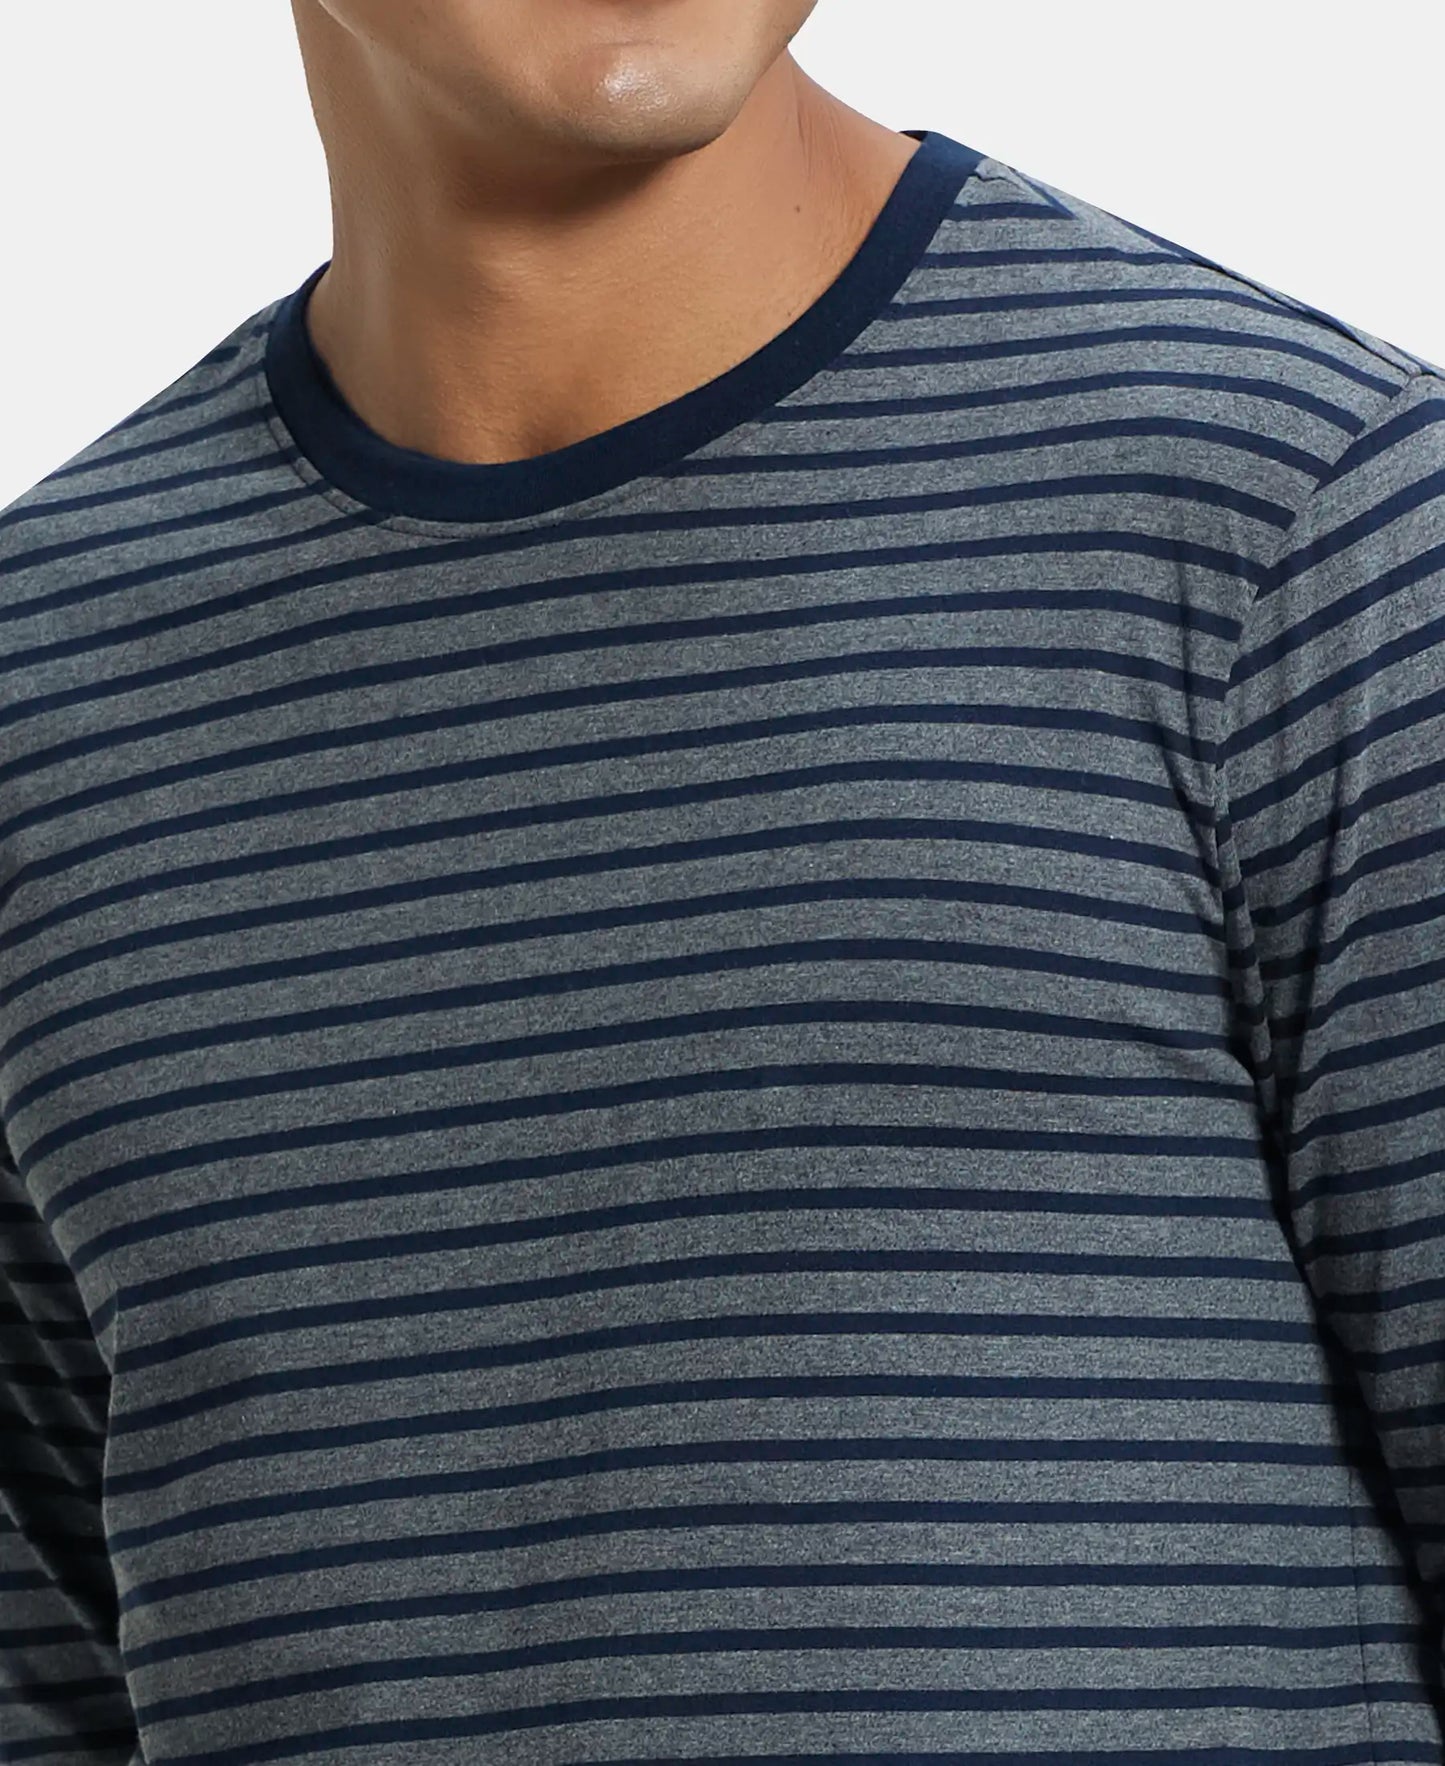 Super Combed Cotton Rich Striped Round Neck Full Sleeve T-Shirt - Charcoal & Navy-6